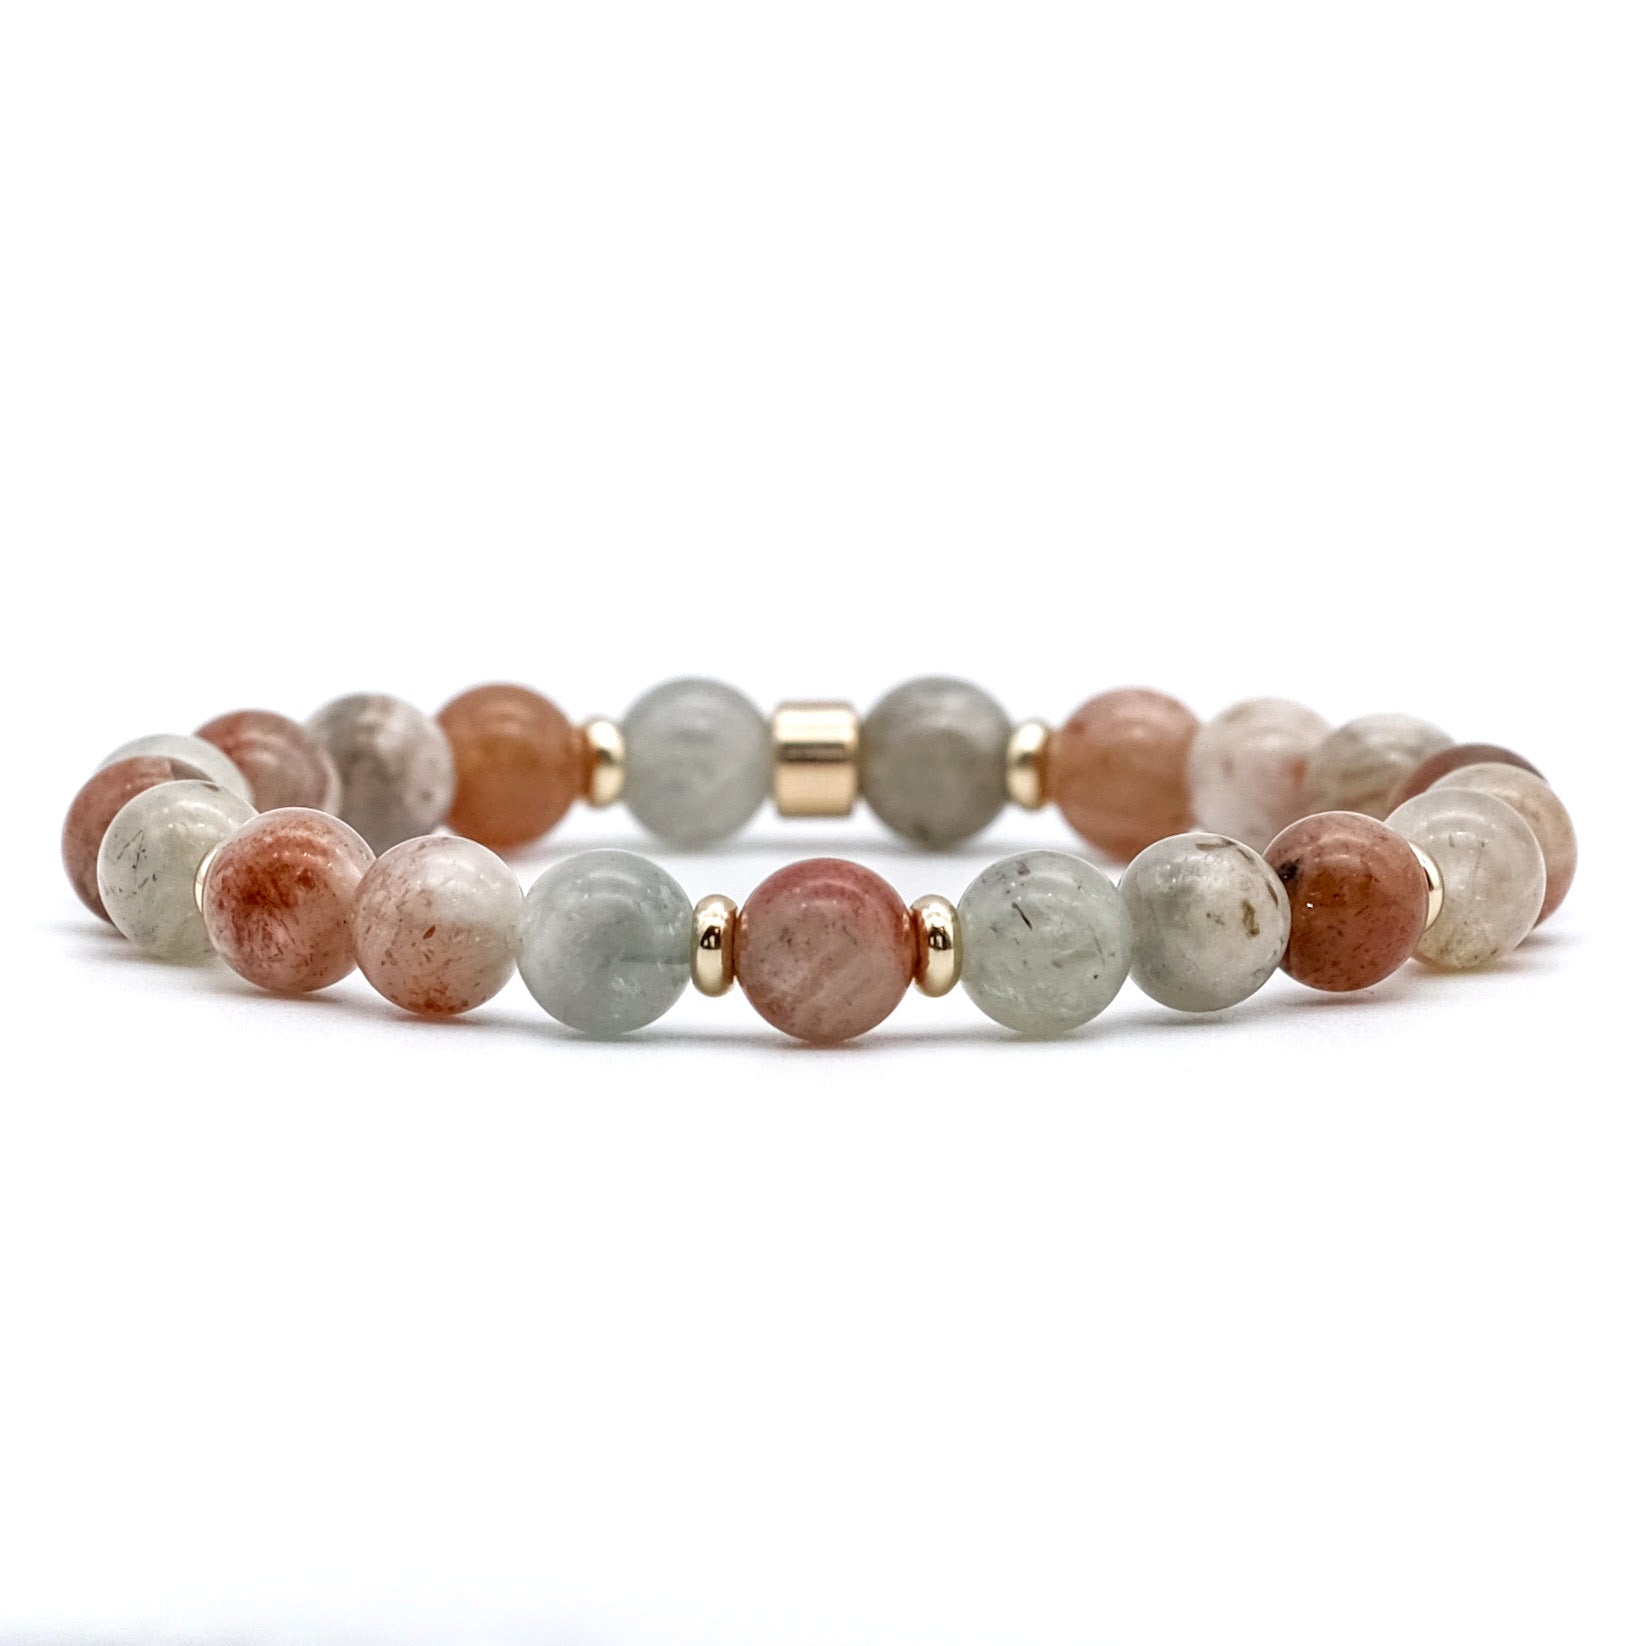 Arusha sunstone gemstone bracelet in 8mm with 18ct gold plated accessories